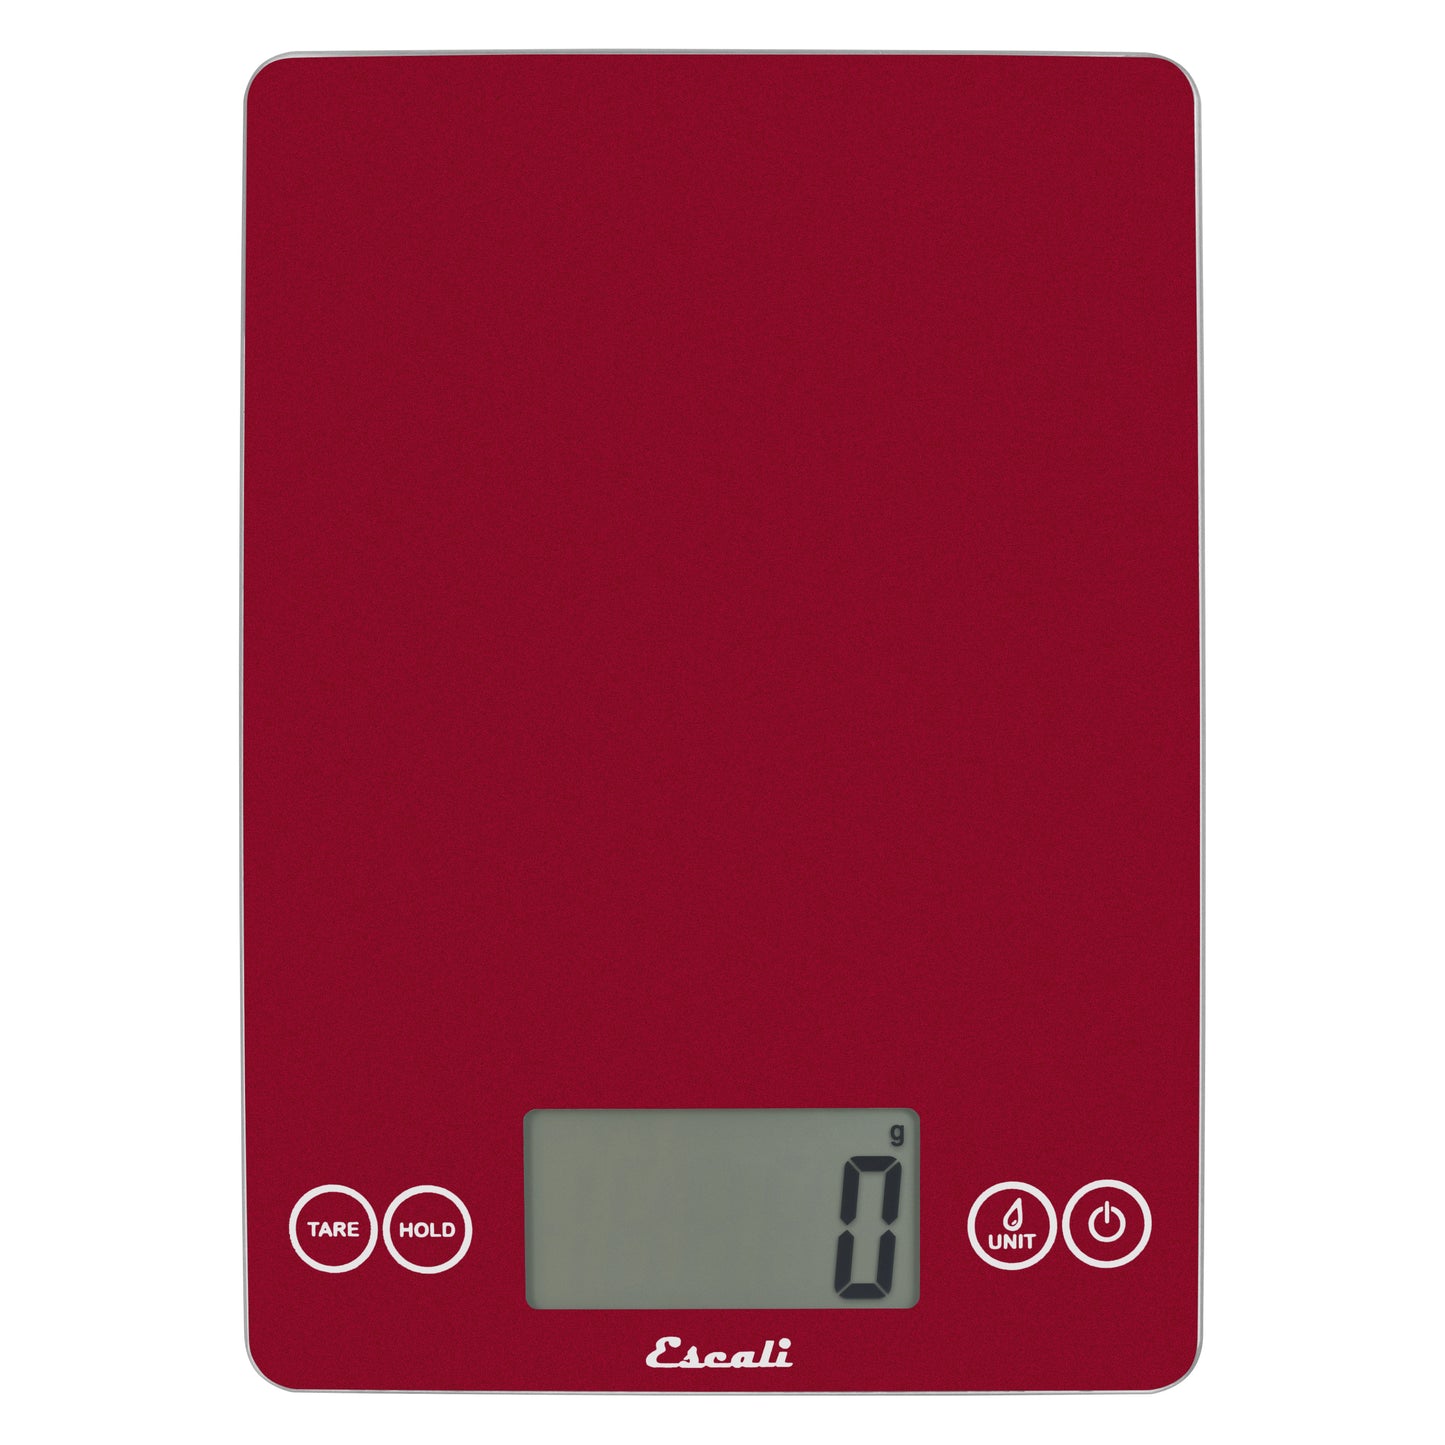 A photo of a rio red color ARTI Digital Kitchen Scale on a white background.